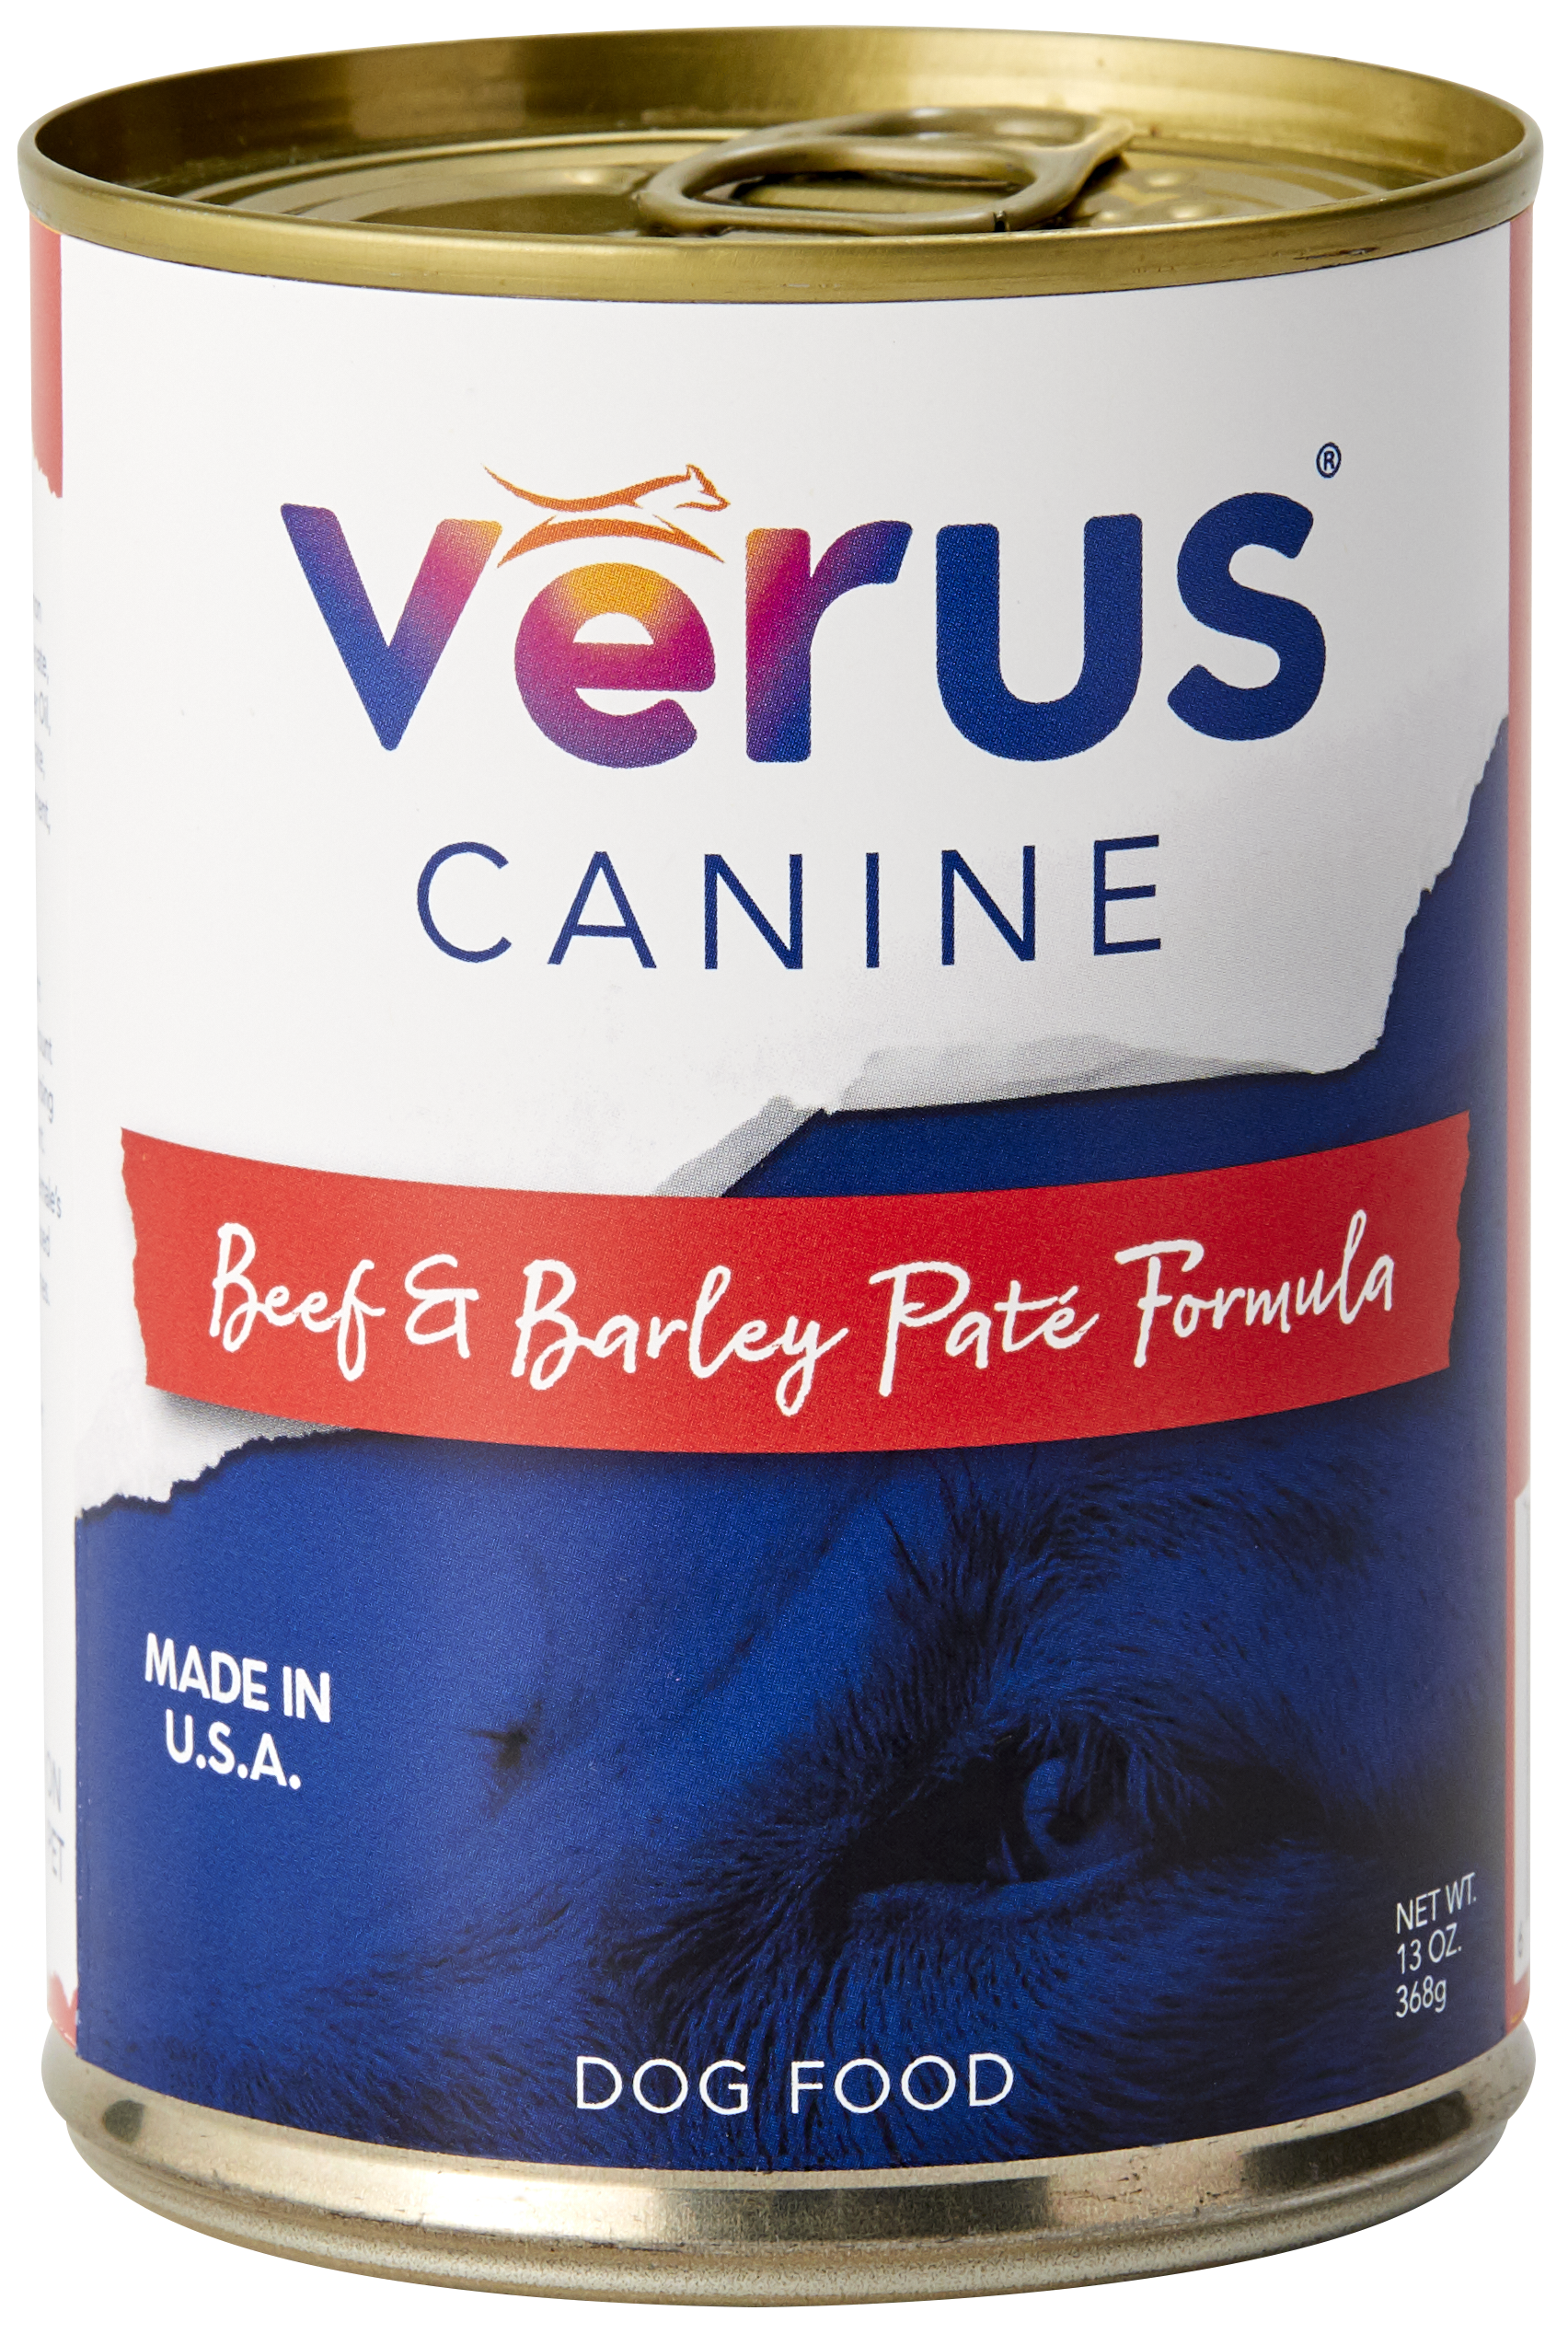 Canine-Beef-Barley-5cd1d21a19121